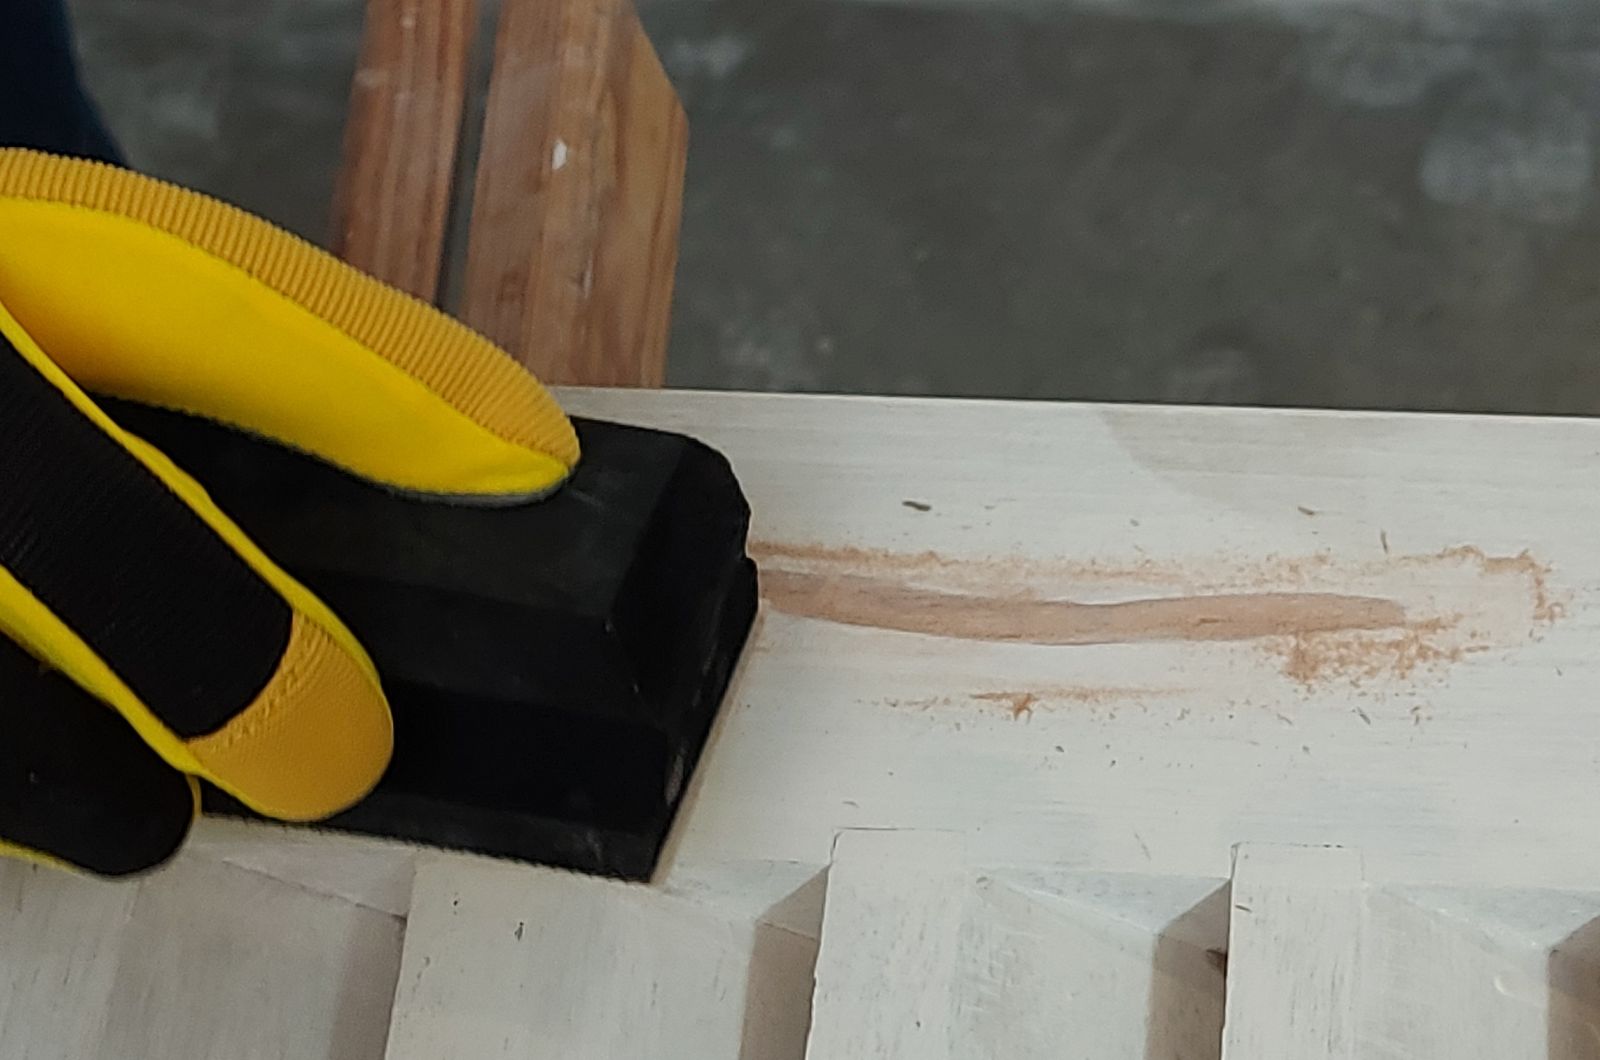 How to effortlessly fill wood